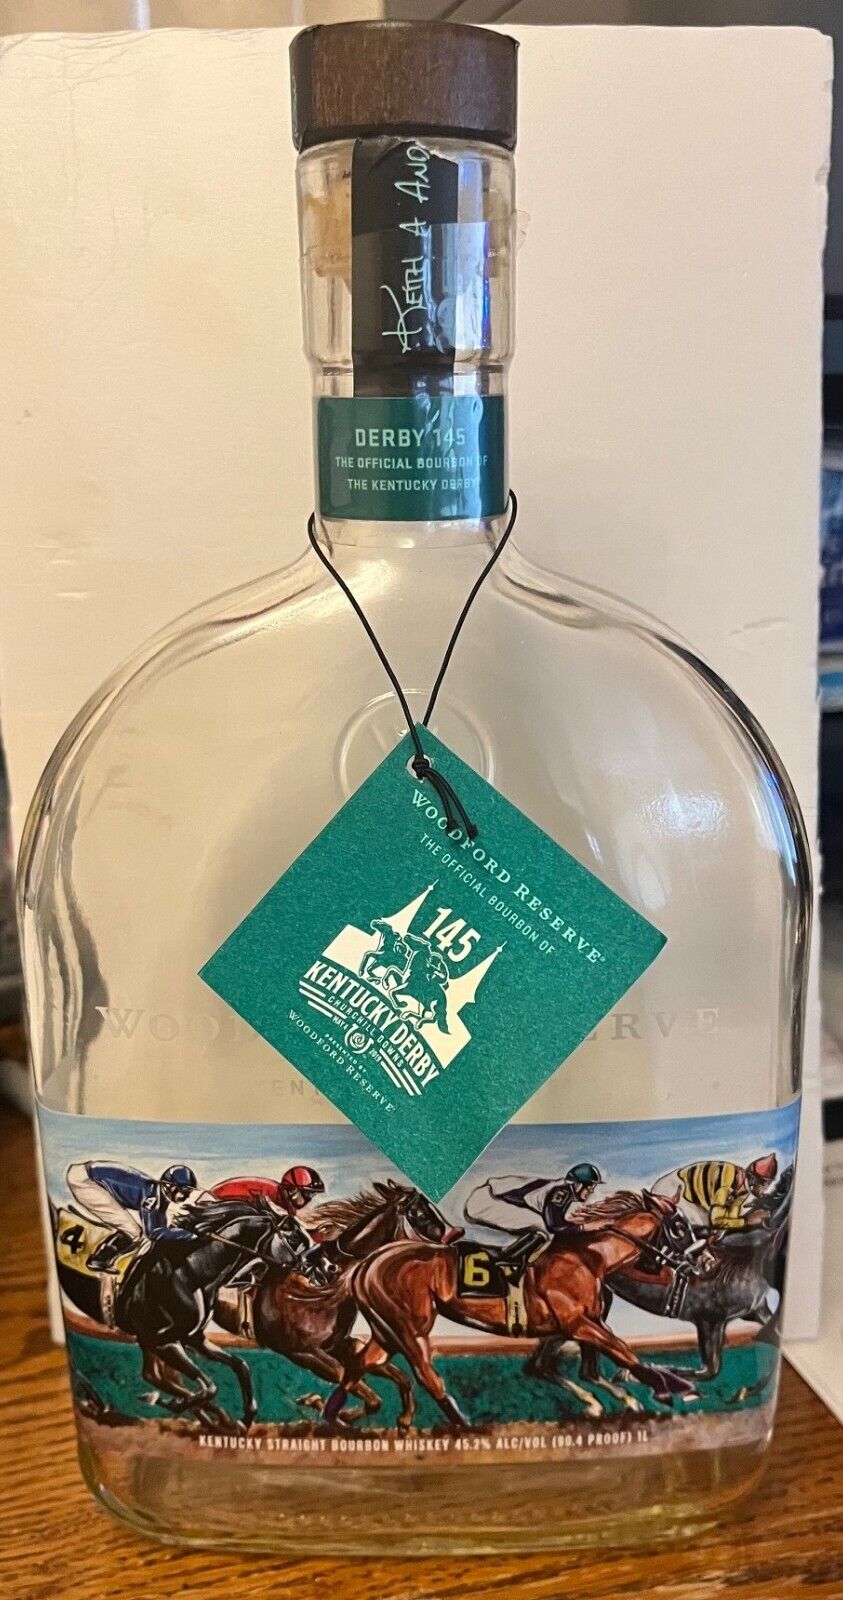 WOODFORD RESERVE KENTUCKY DERBY 145 2019 20TH ANNIVERSARY EMPTY BOTTLE CORK TAG